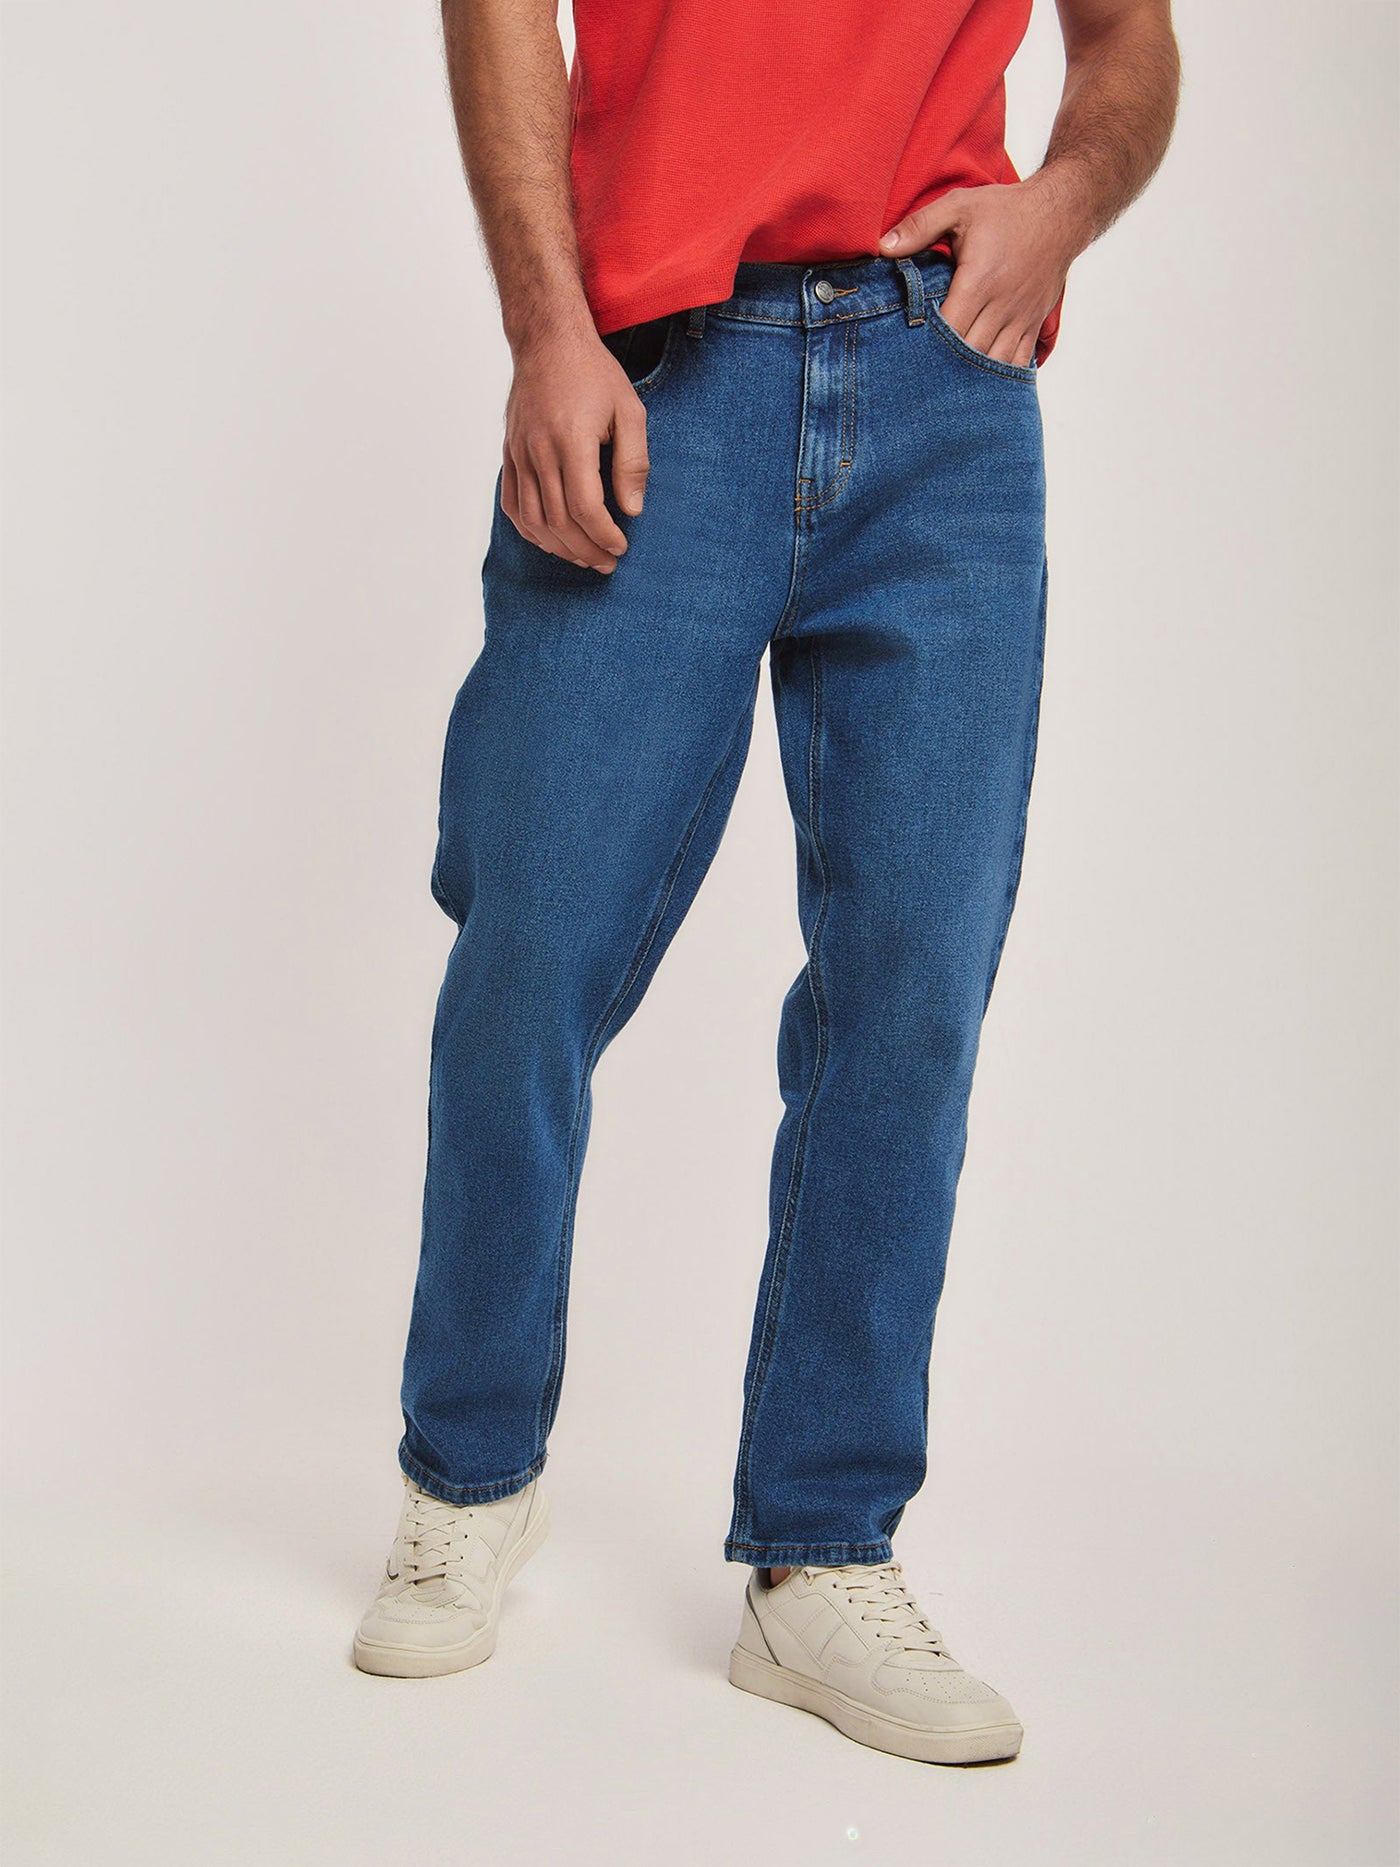 Jeans - Tapered Leg - Casual